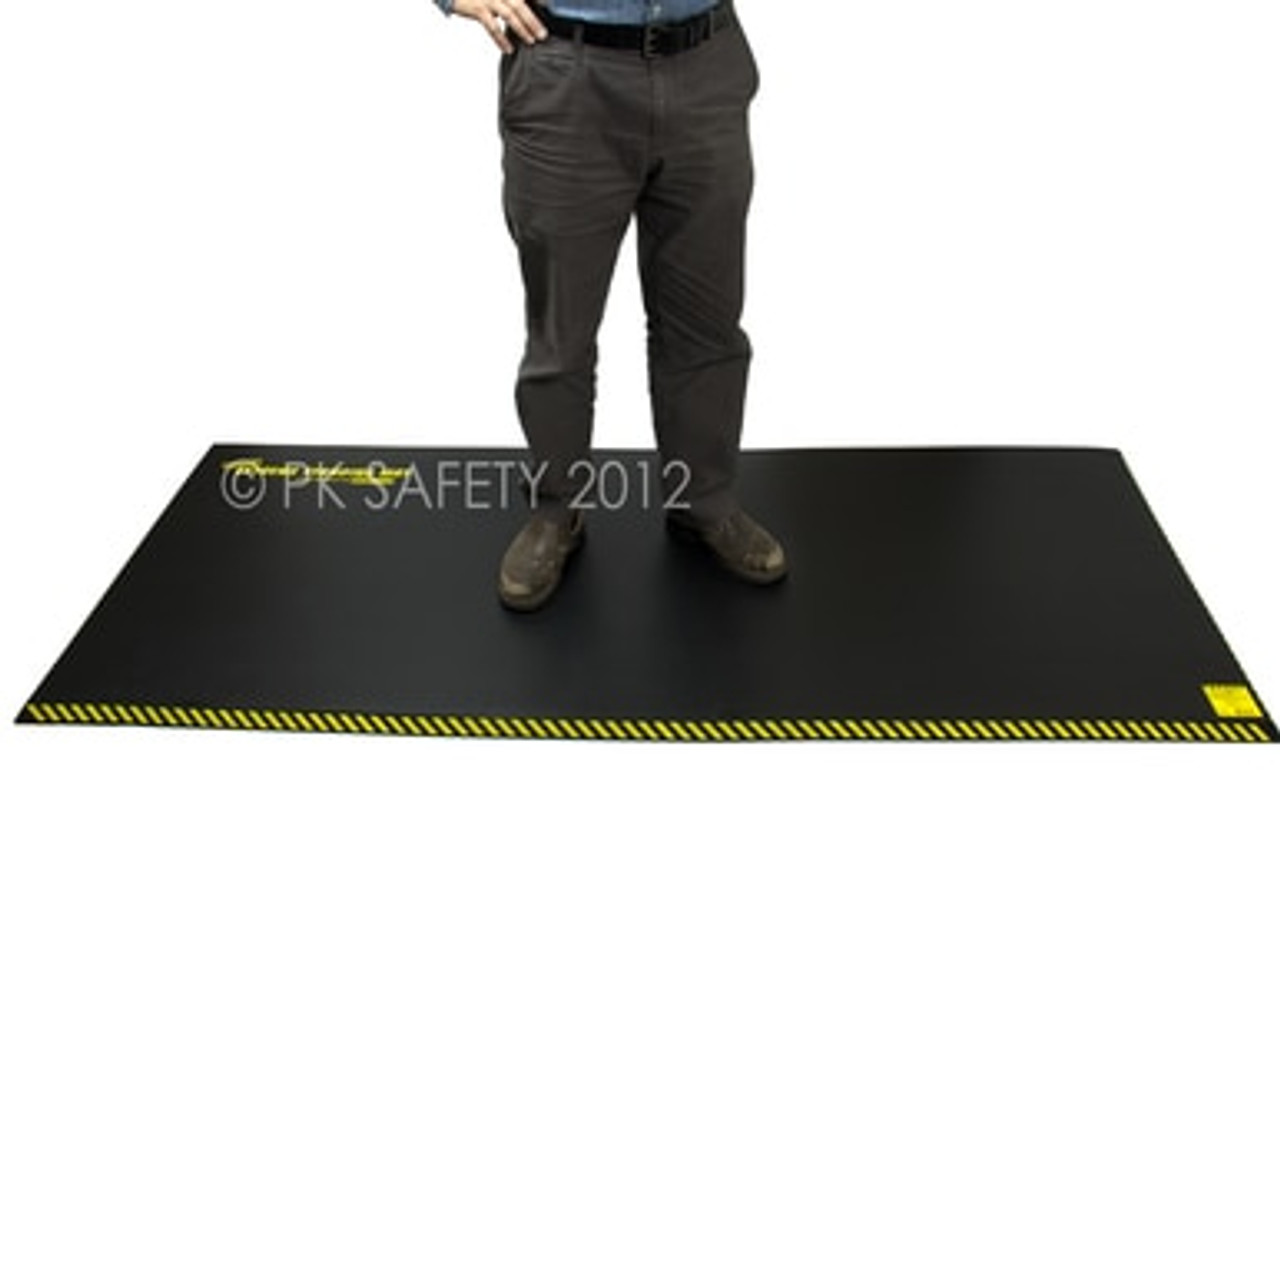  FEATOL Anti Fatigue Mats Industrial, Ergonomic Standing Floor  Mat, Work Mats for Standing,Black with Yellow Border Safety Mat 20 x 39- Standing Support for Leg & Back Pain, Waterproof, Non-Slip : Industrial